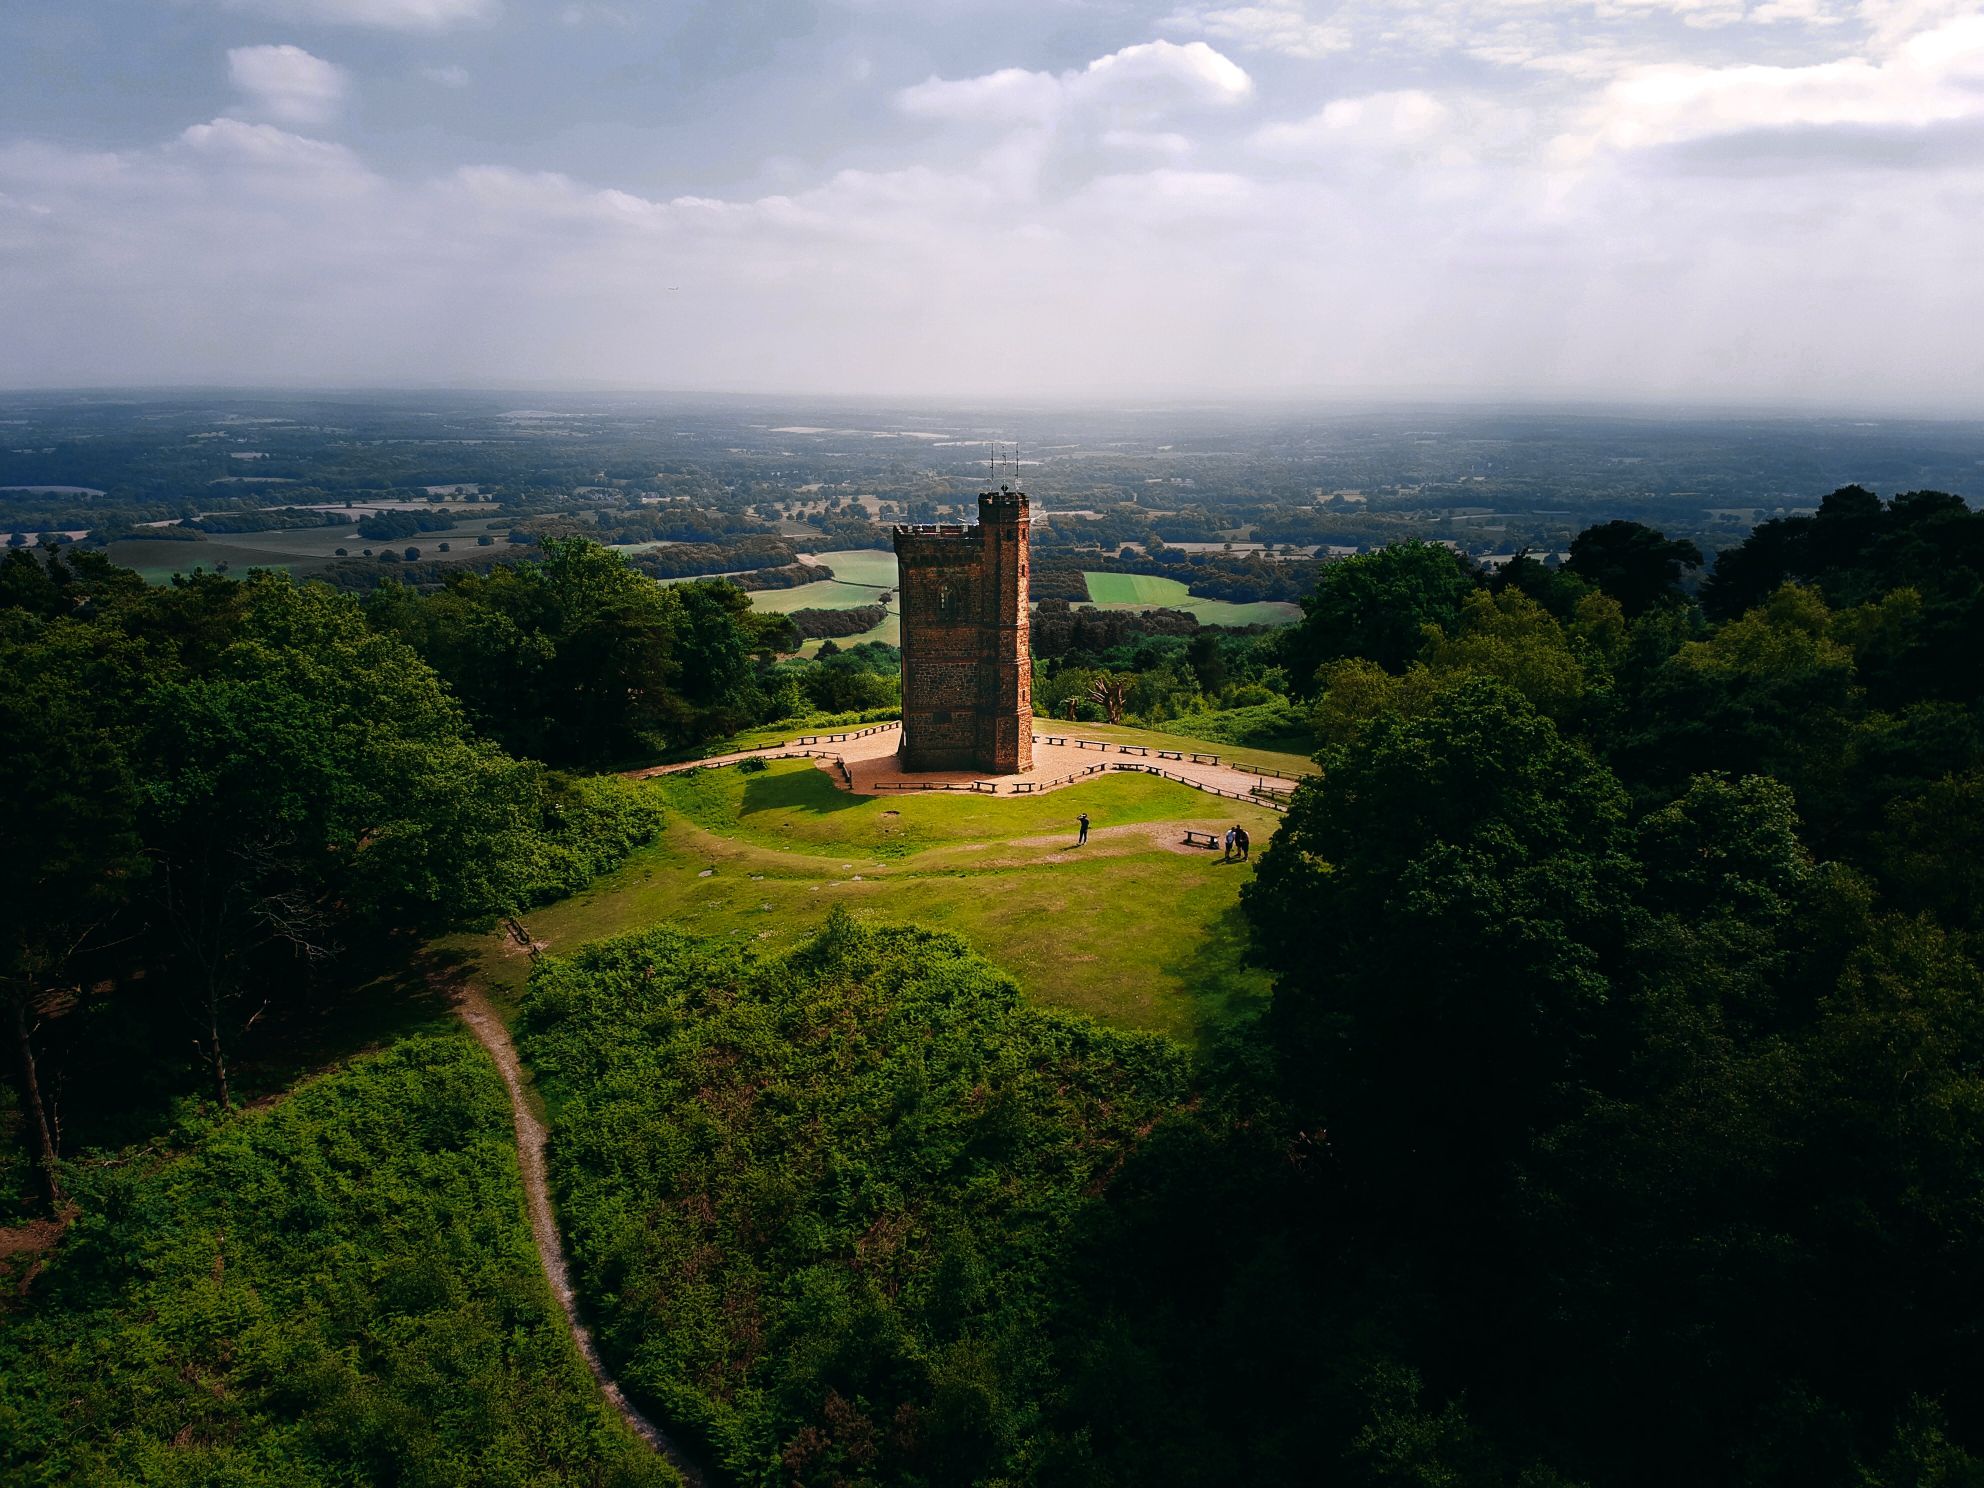 The stunning form of Leith Hill tower at the height of the climb, one of the best hikes near London.